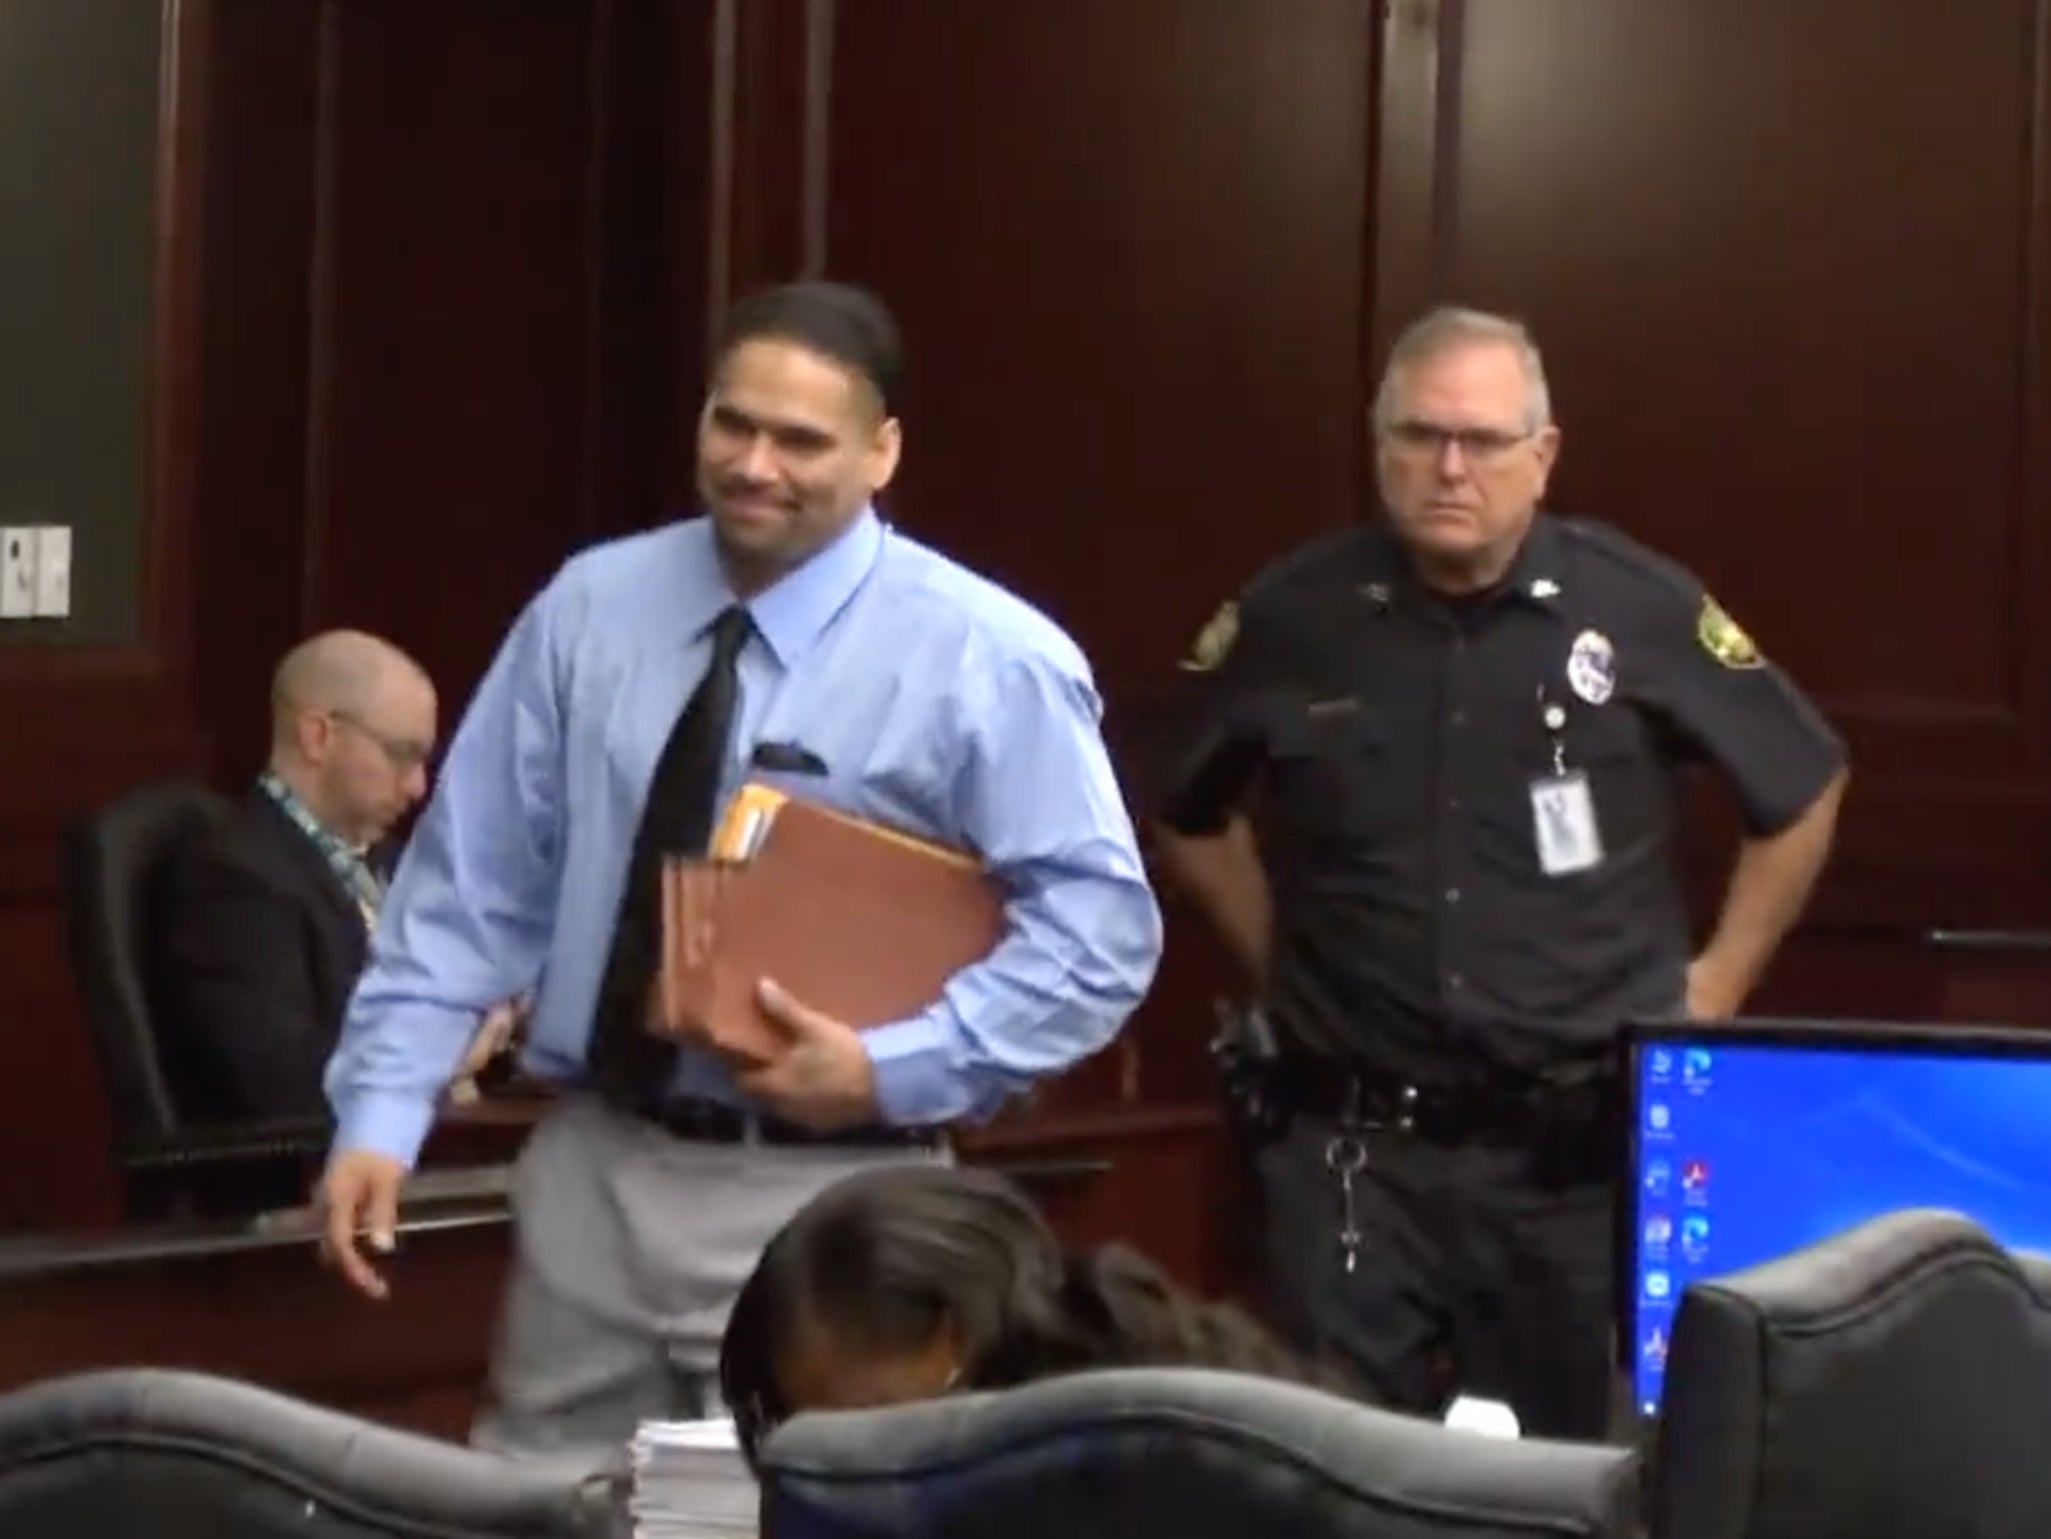 Johnathan Quiles, 38, smiles as he enters court, where he was charged with the first-degree murder of his niece, Iyana Sawyer, 16, who was pregnant with his child